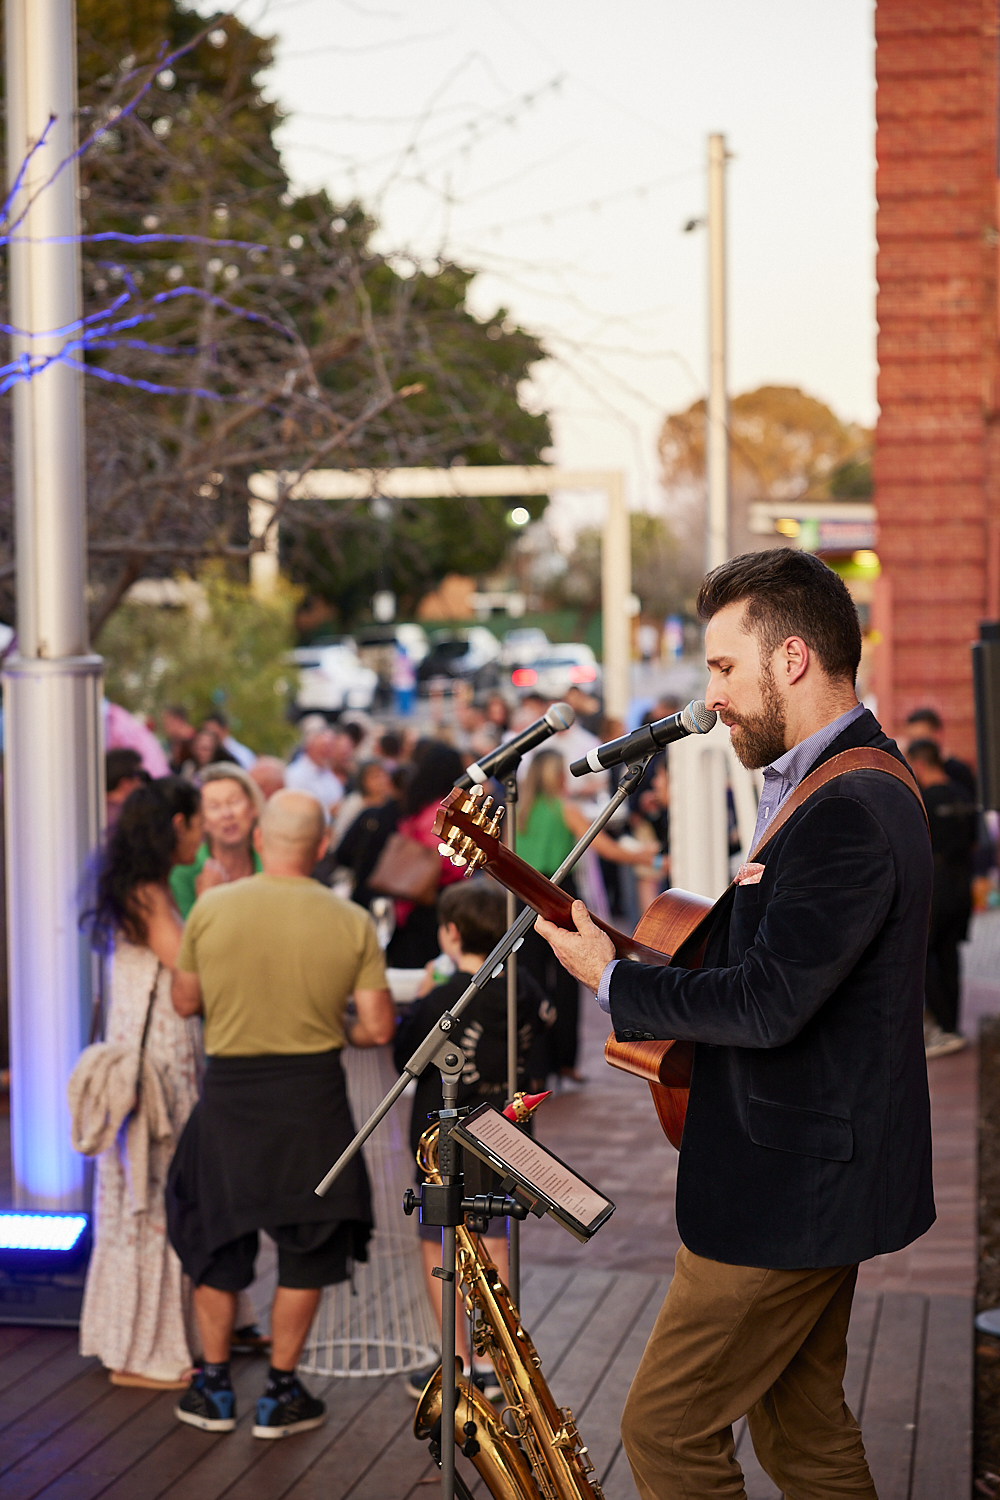 A musical entertainer plays music for a crowd in a newly upgraded public space.